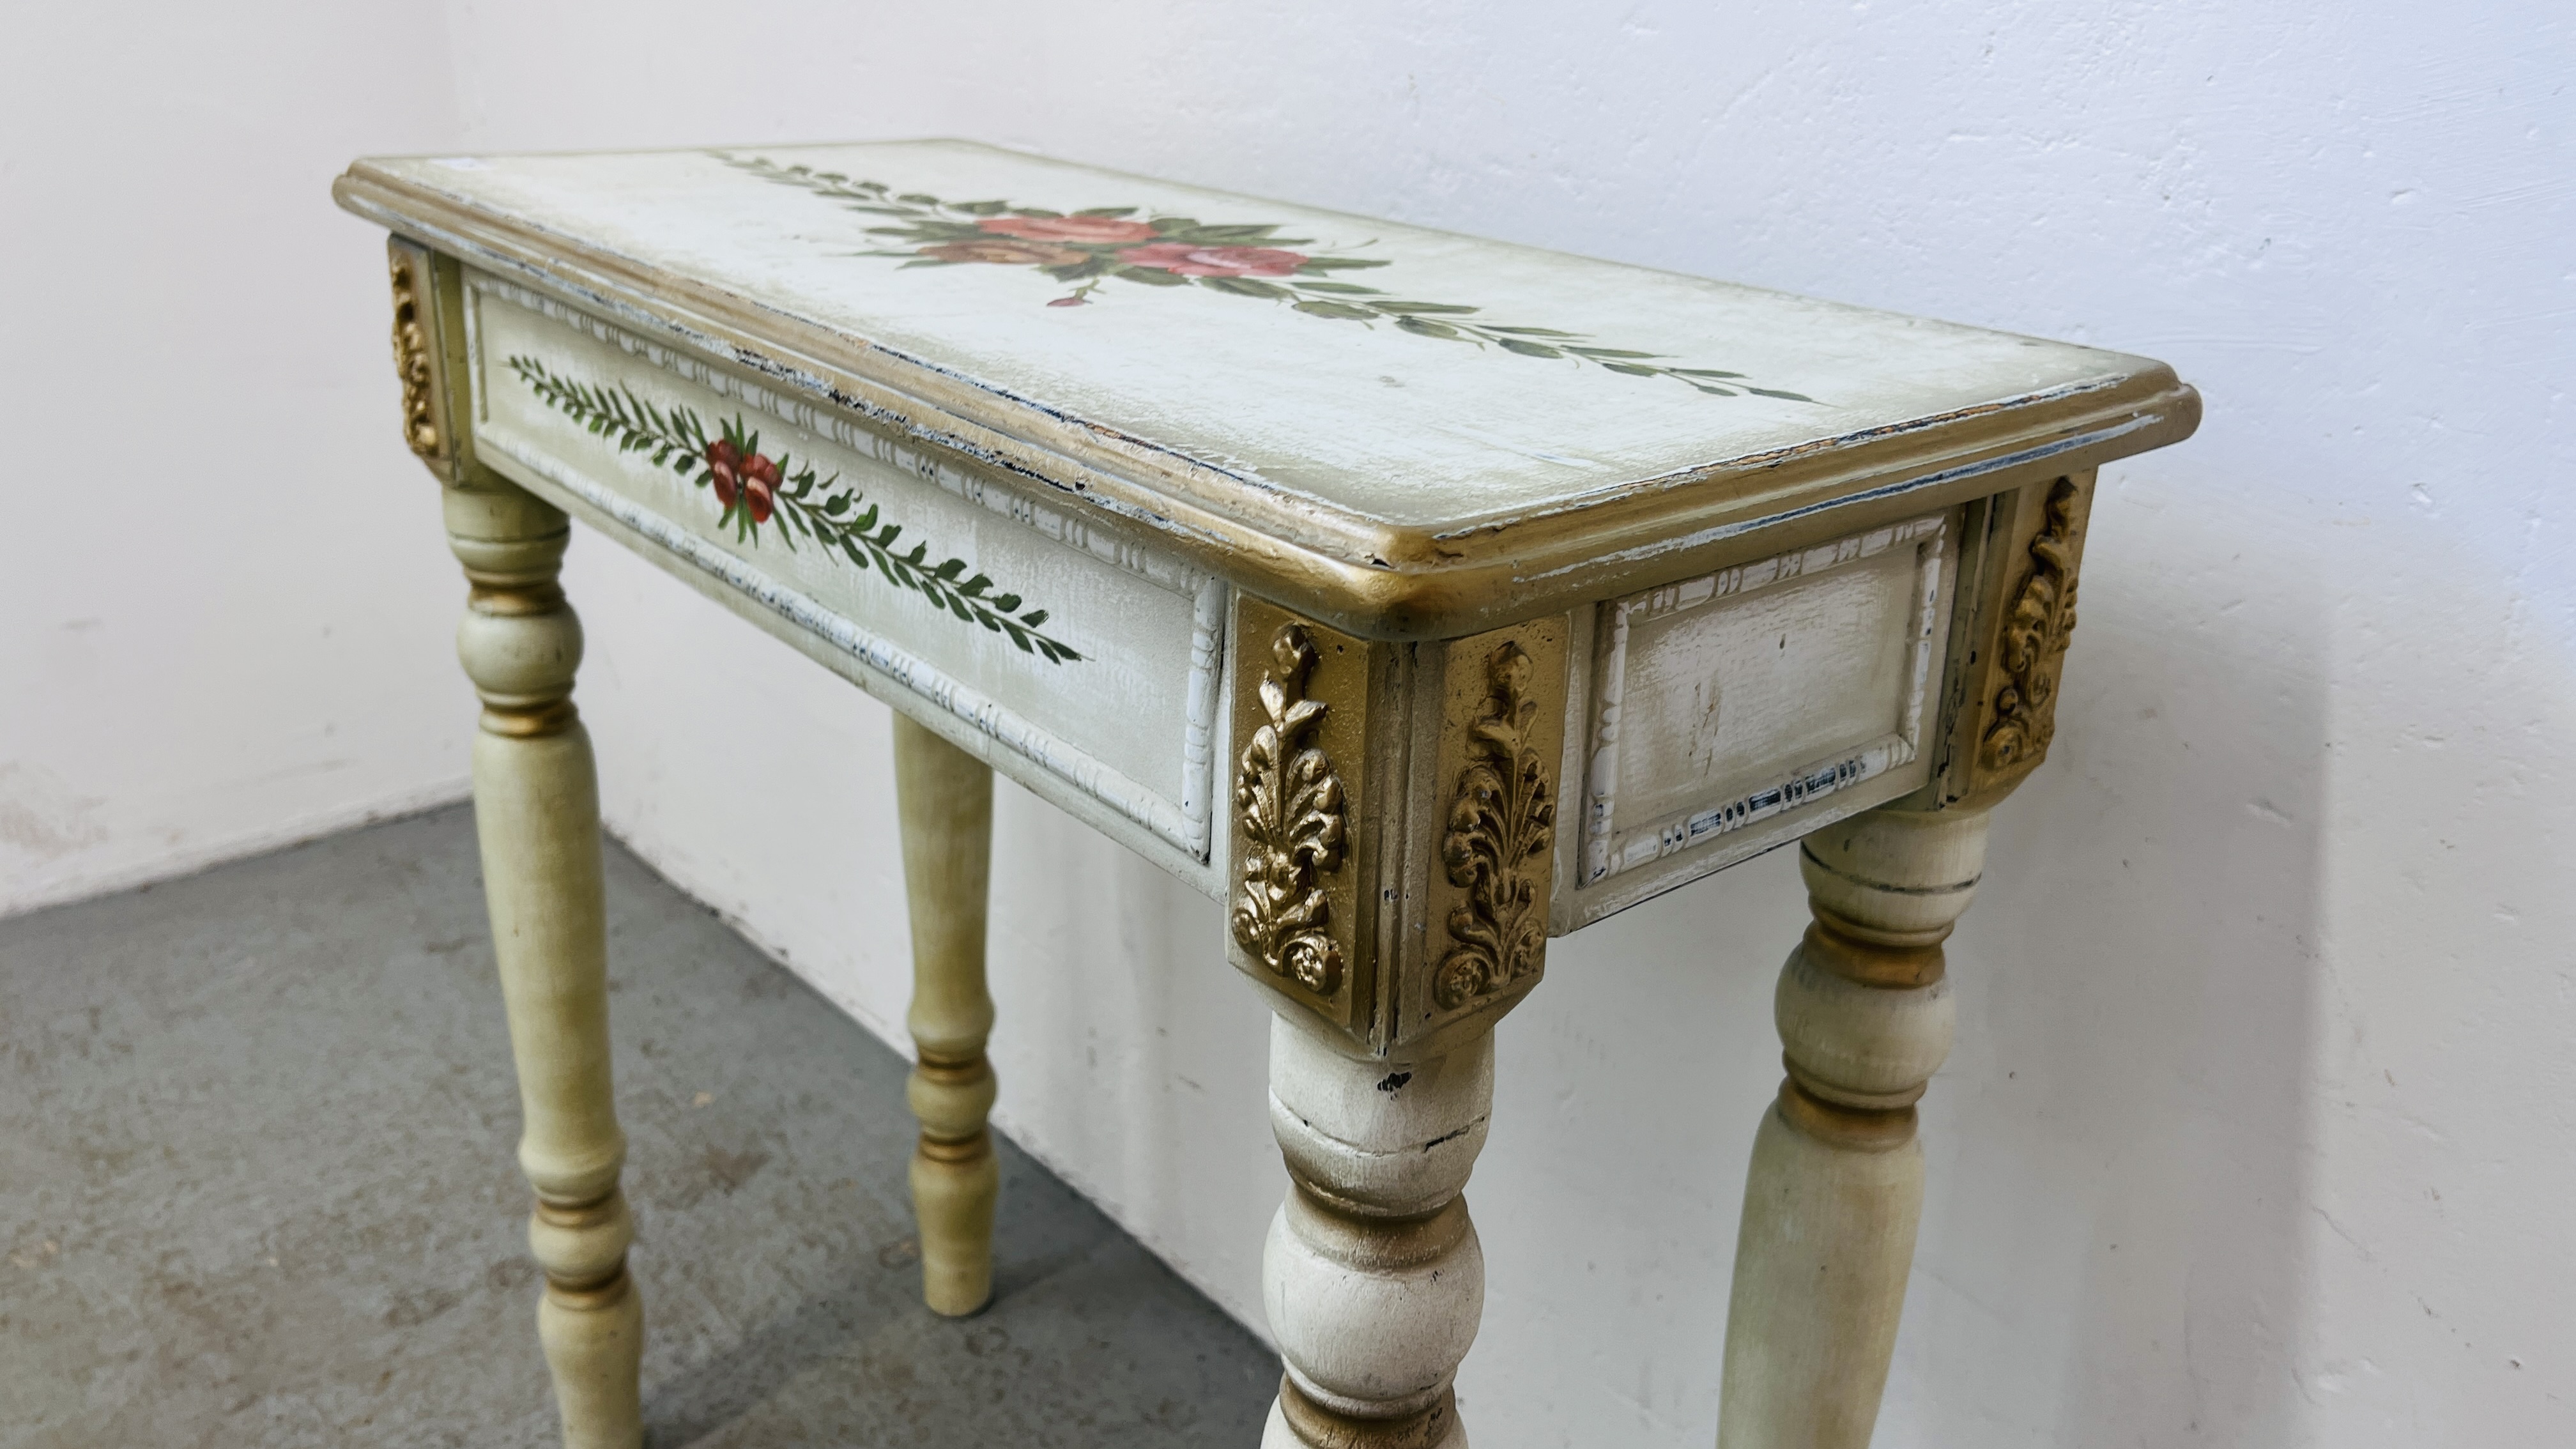 A SHABBY CHIC HALL TABLE WITH HAND PAINTED ROSE GARLAND DESIGN WIDTH 76CM. DEPTH 35CM. HEIGHT 77CM. - Image 4 of 5